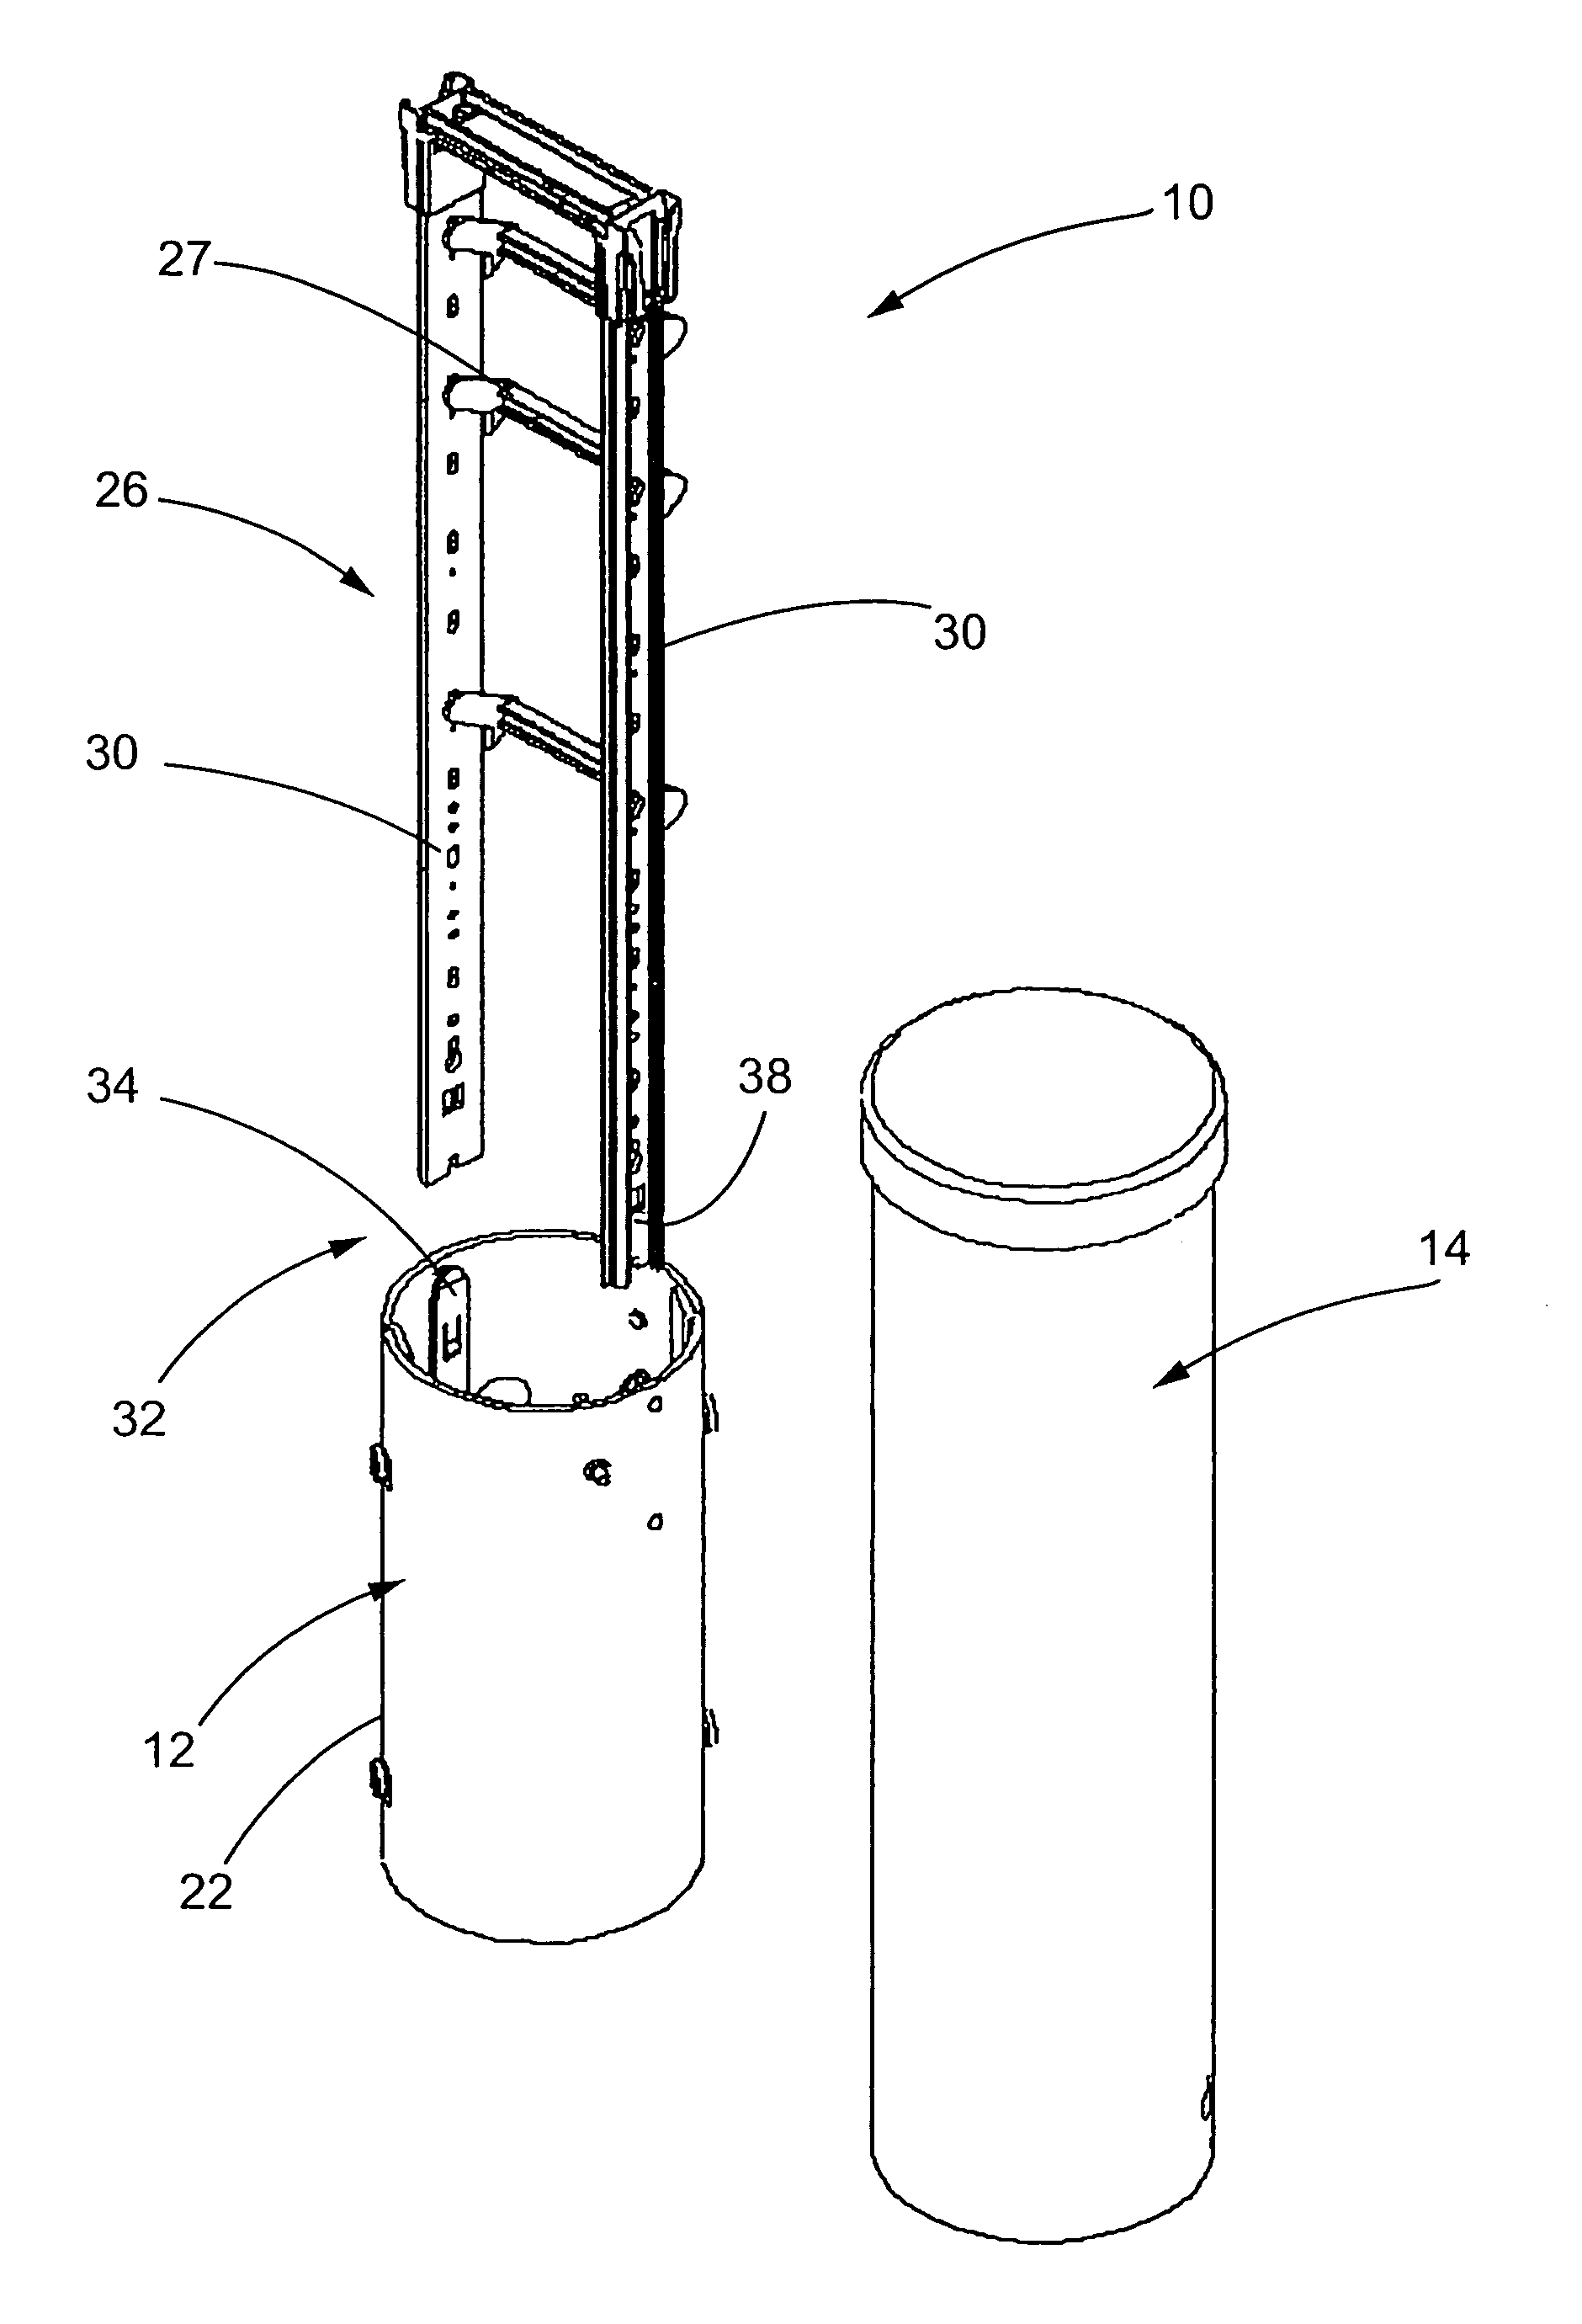 Universal mounting arrangement for components of an electronic enclosure